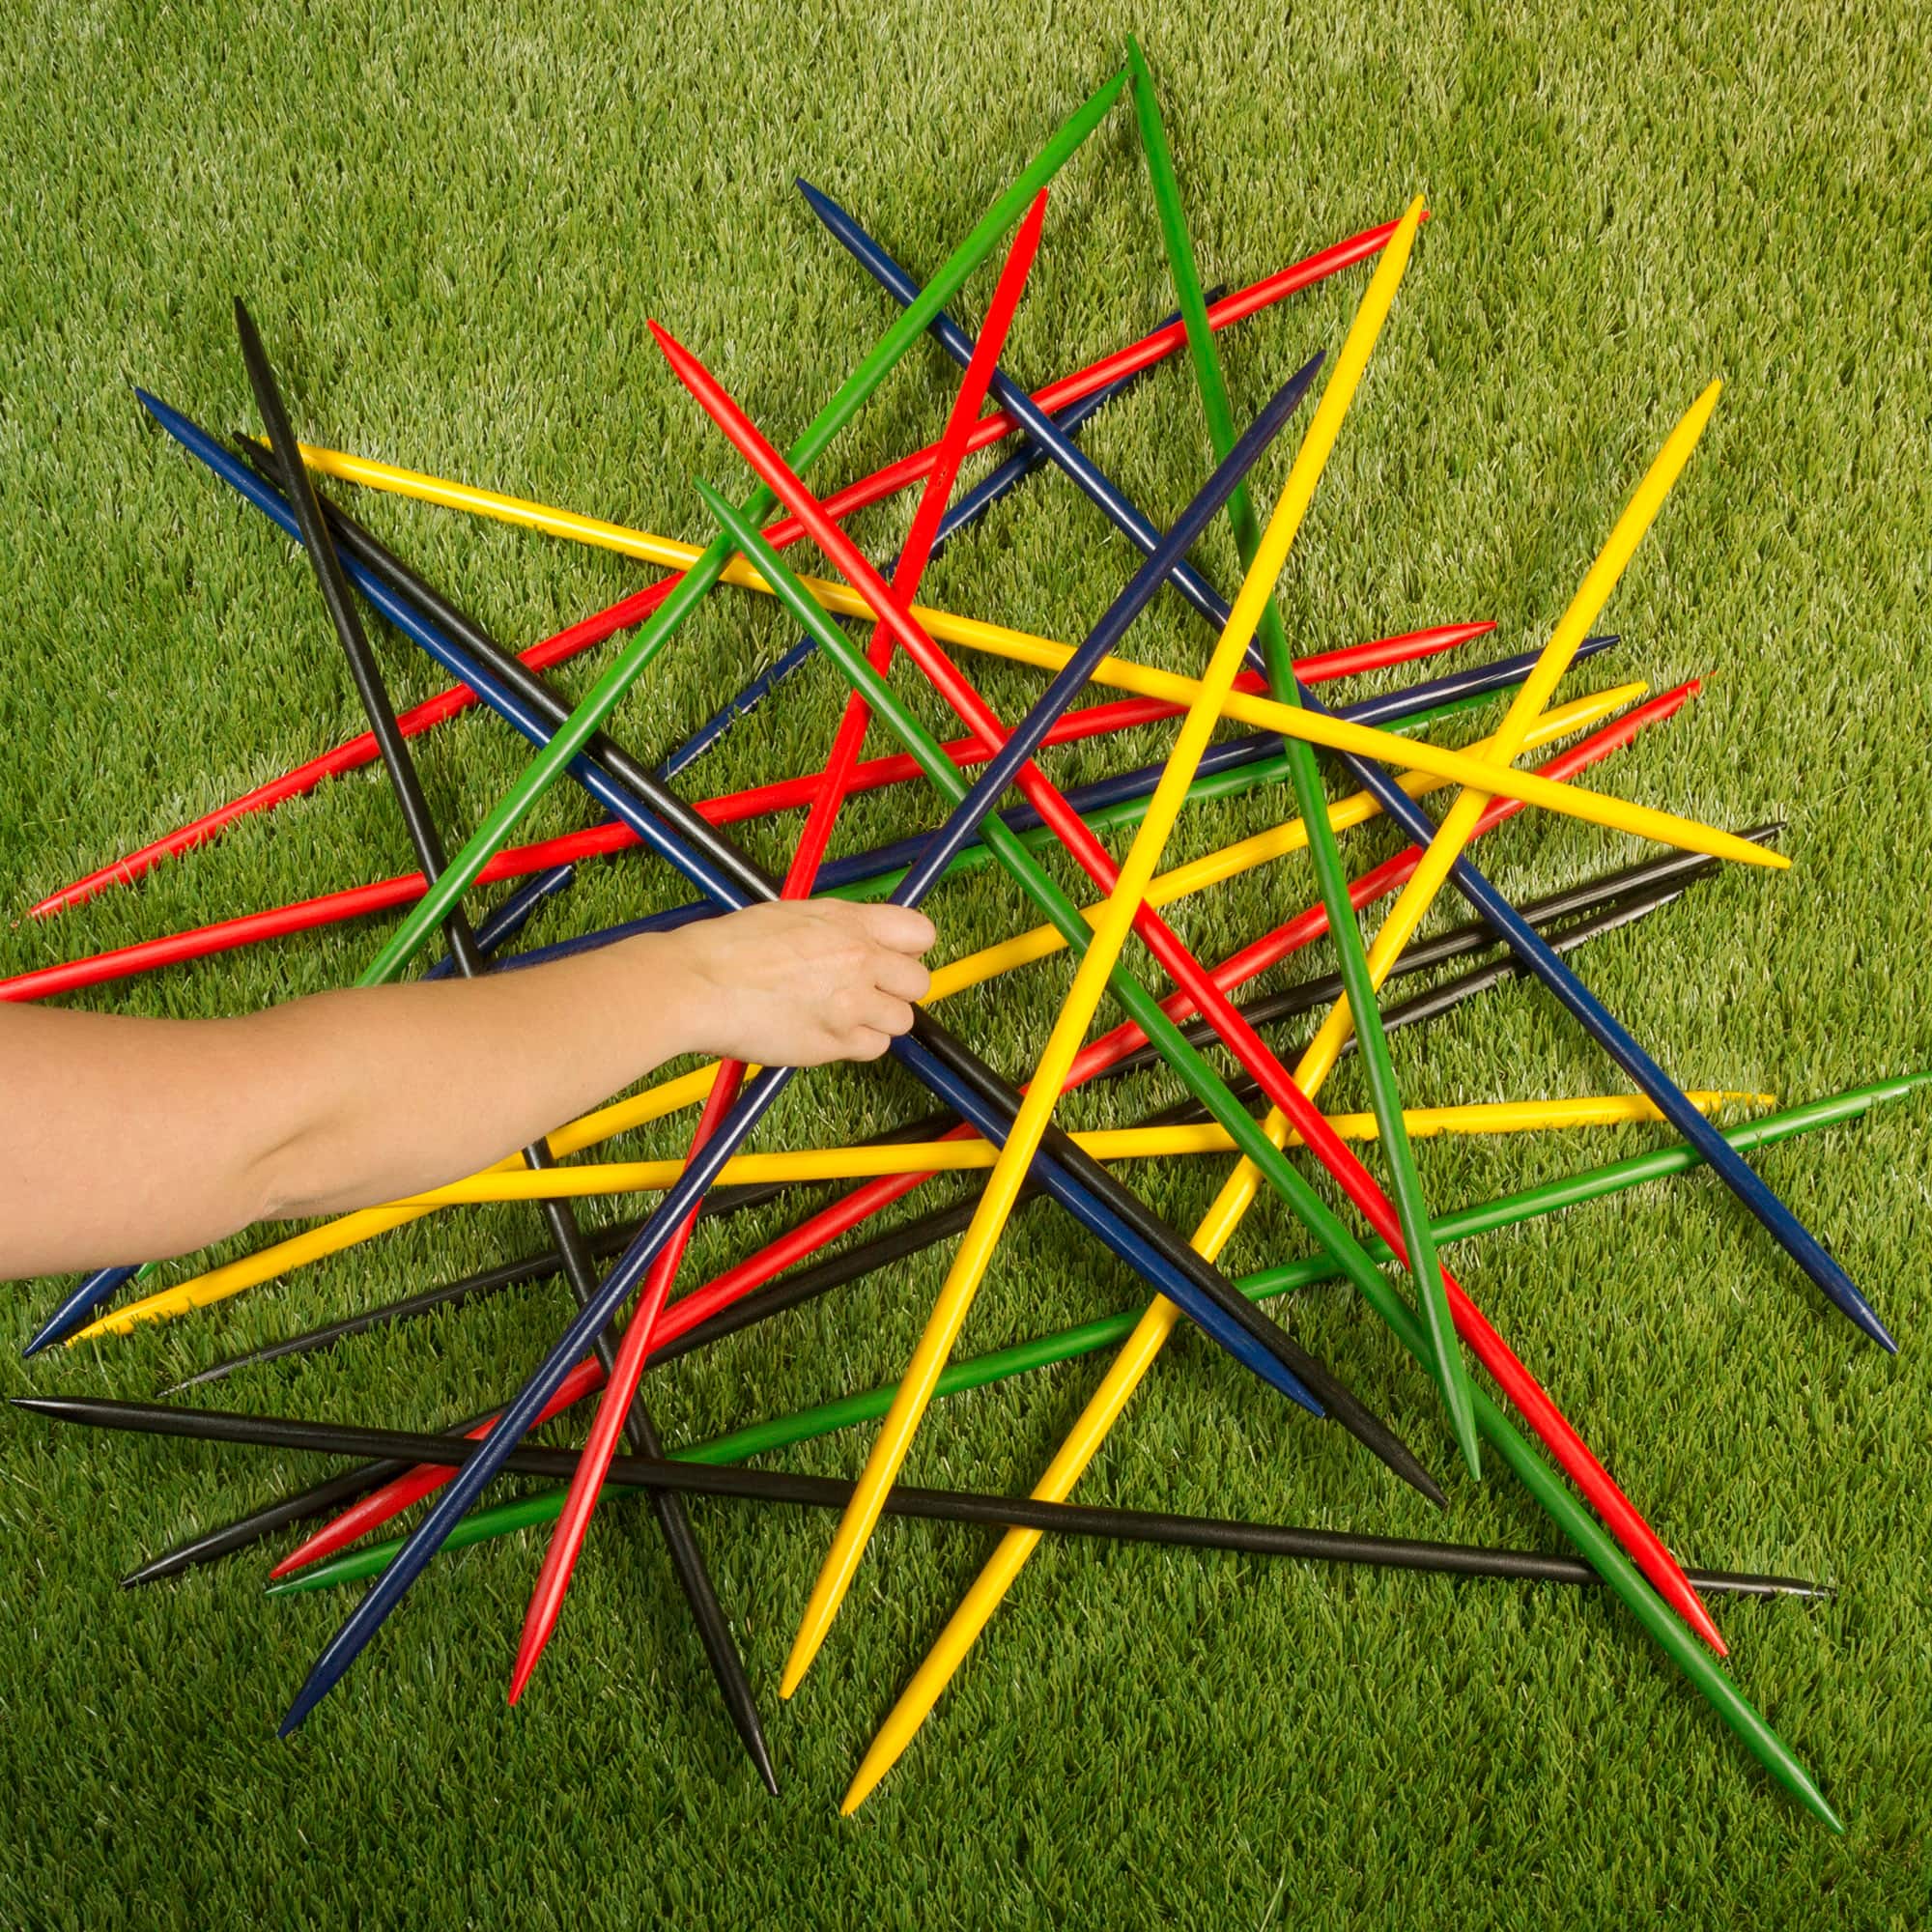 Toy Time Jumbo Pick Up Sticks Classic Wooden Game Set